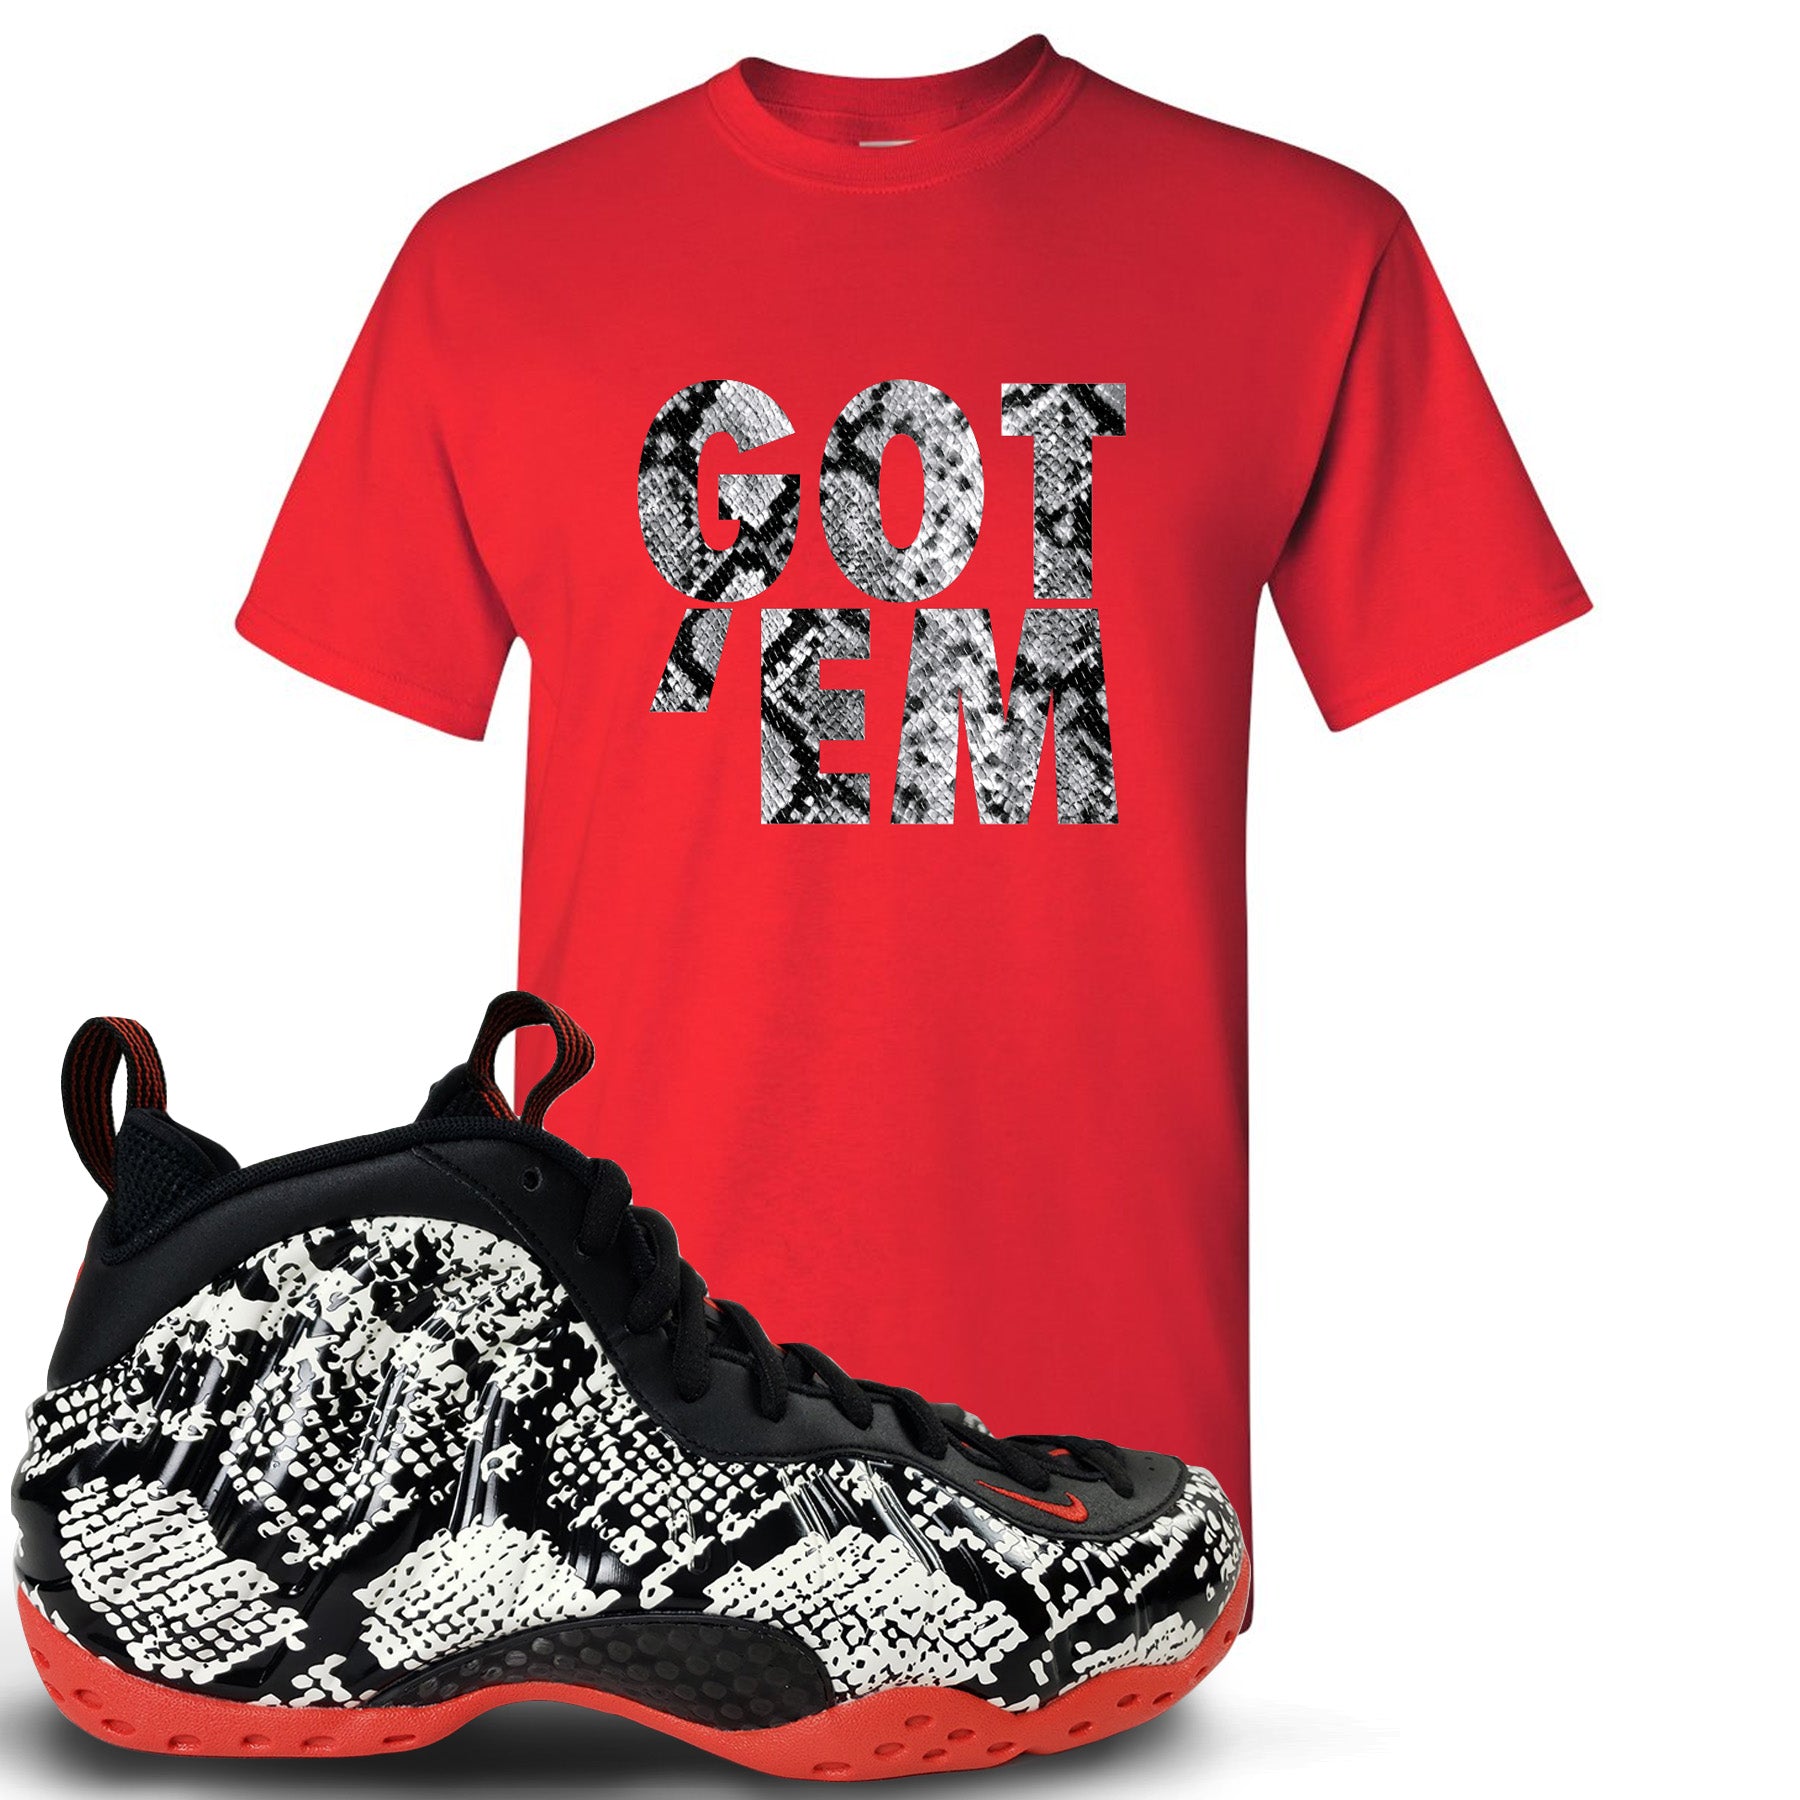 nike foamposite t shirts for sale